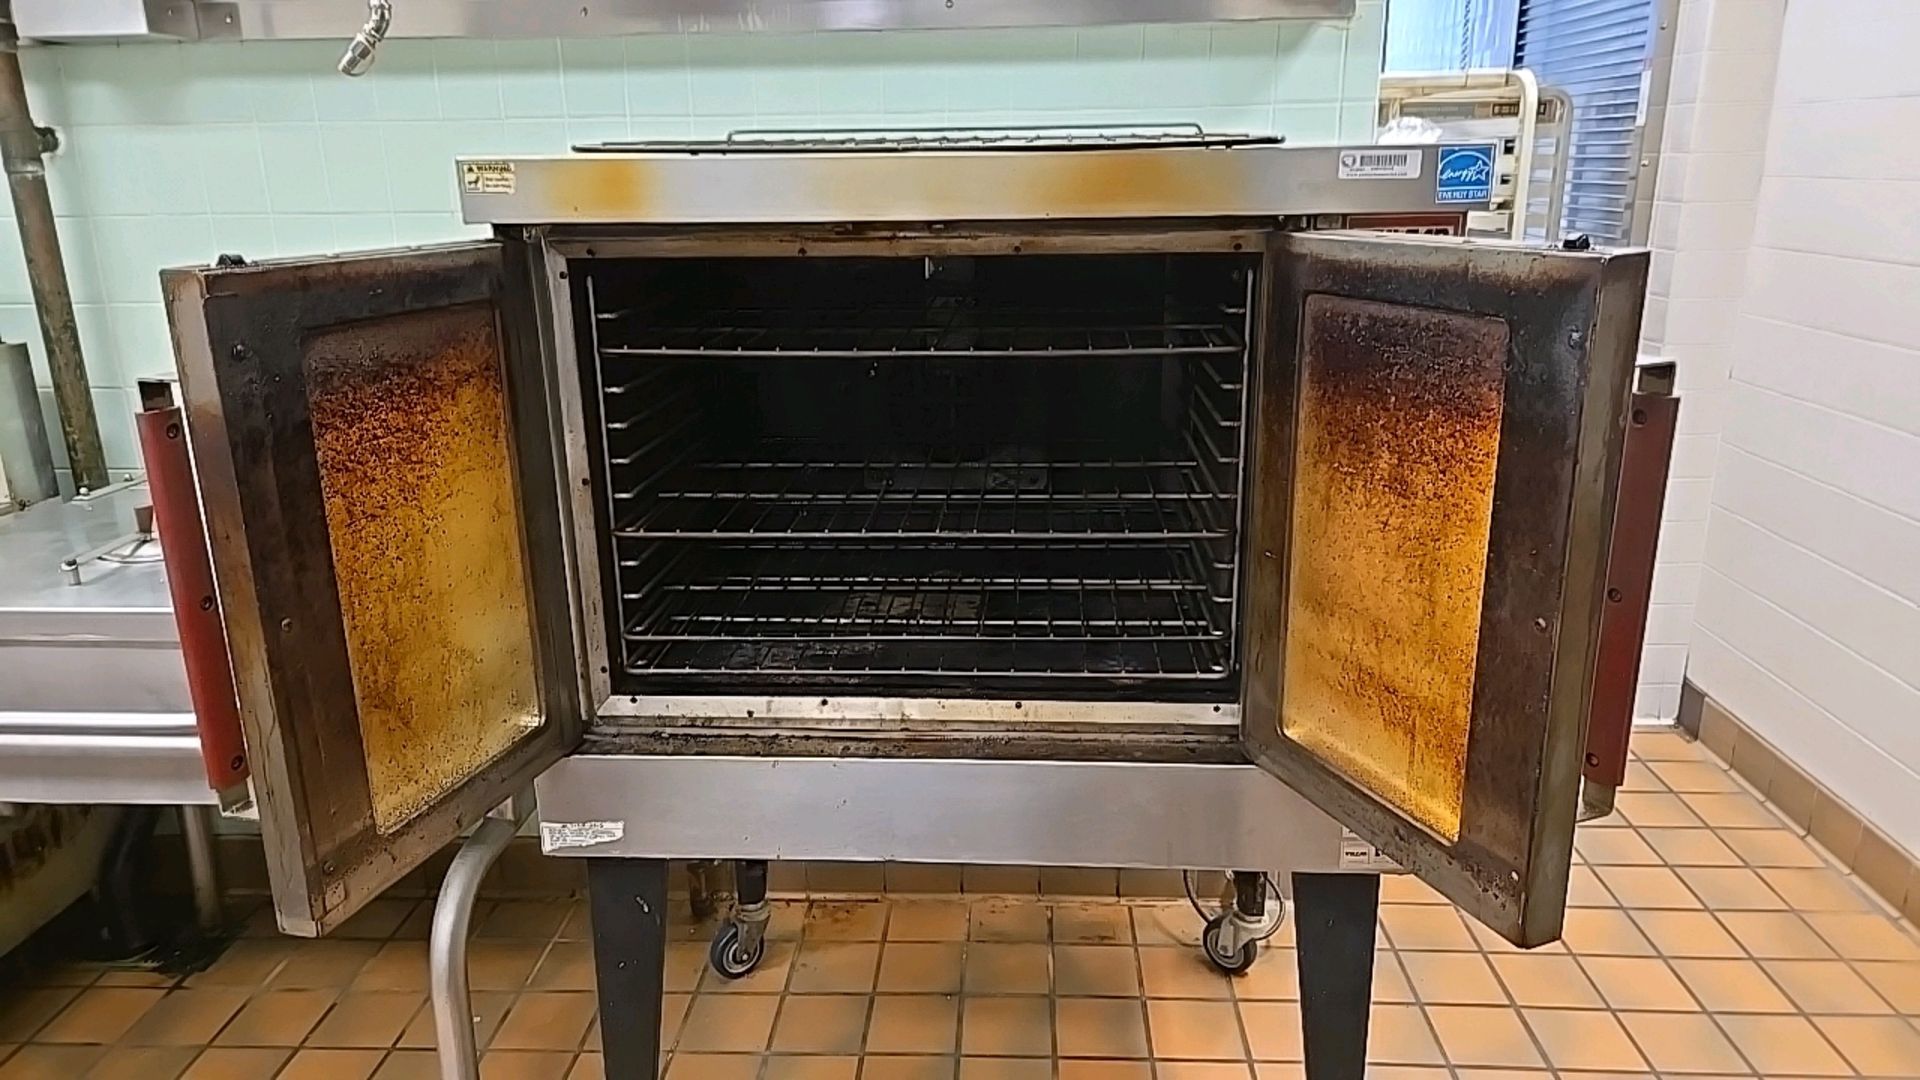 VULCAN MODEL NO. VC4GD-10 SINGLE FULL SIZE NATURAL GAS CONVENCTION OVEN ON WHEELS - Image 4 of 4